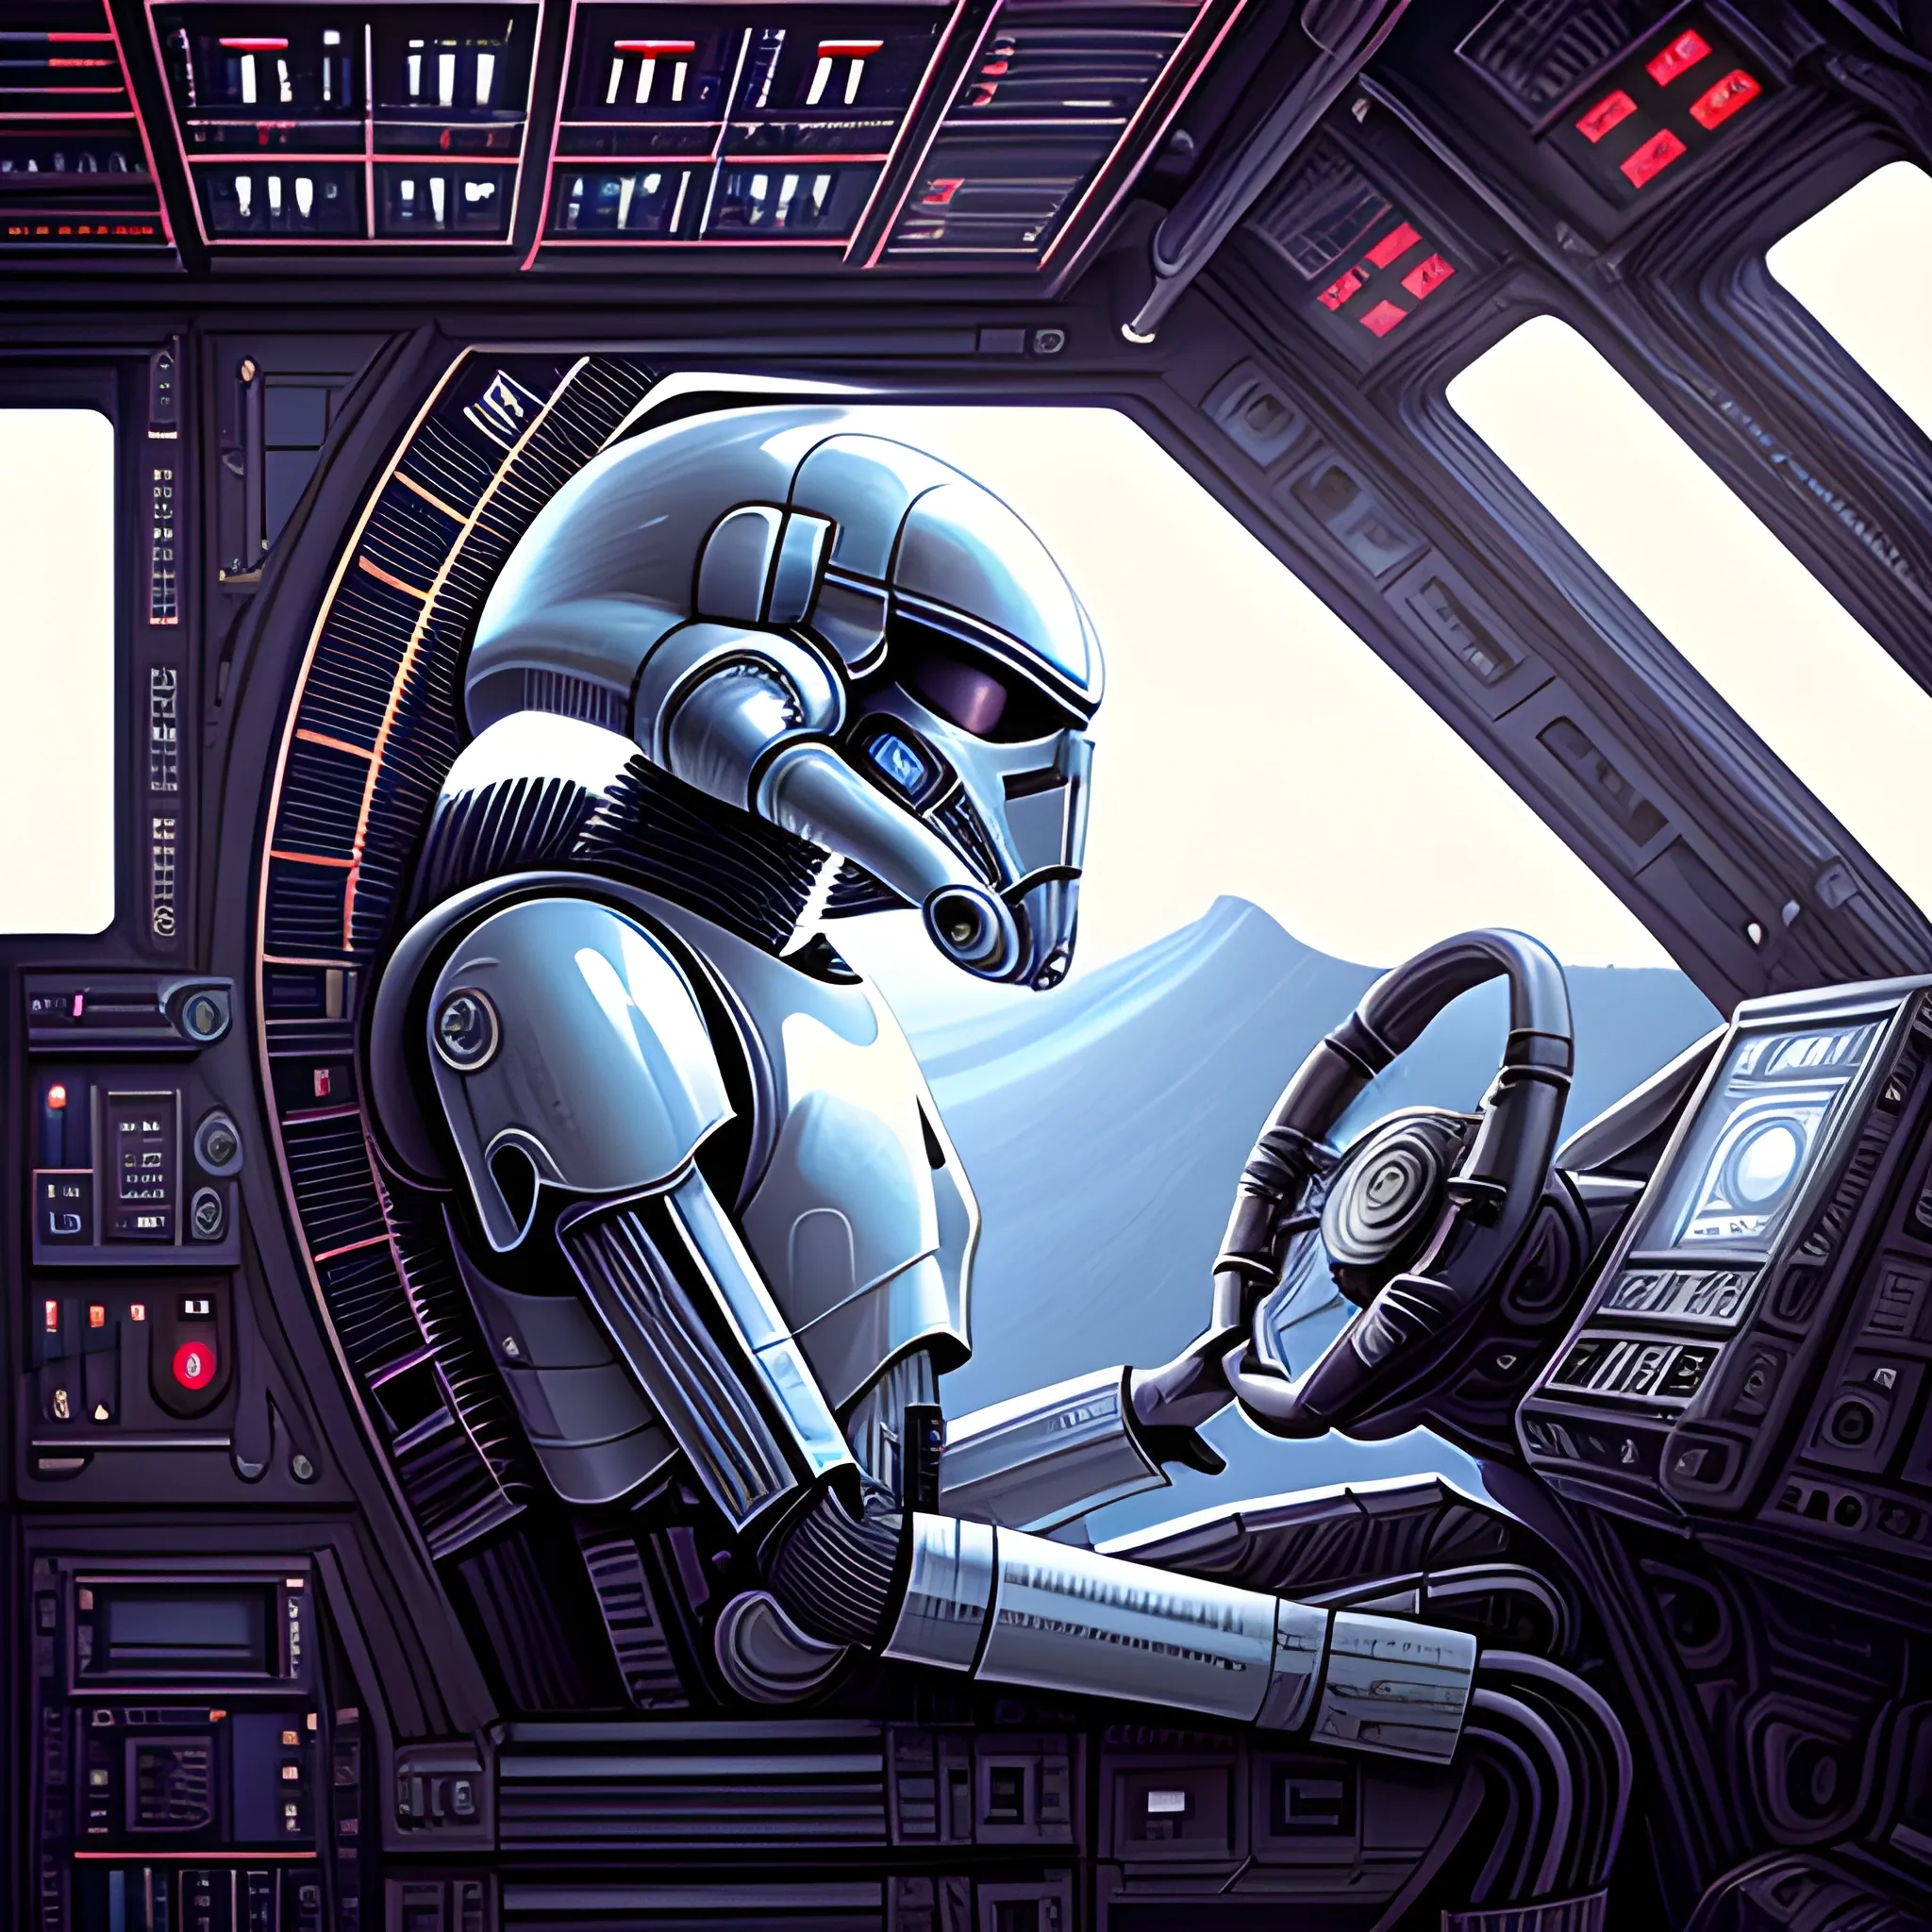 A detailed and intricate digital art piece in a cinematic style, this ultra high resolution portrait of a star wars-like alien sitting on the cockpit of a spaceship.